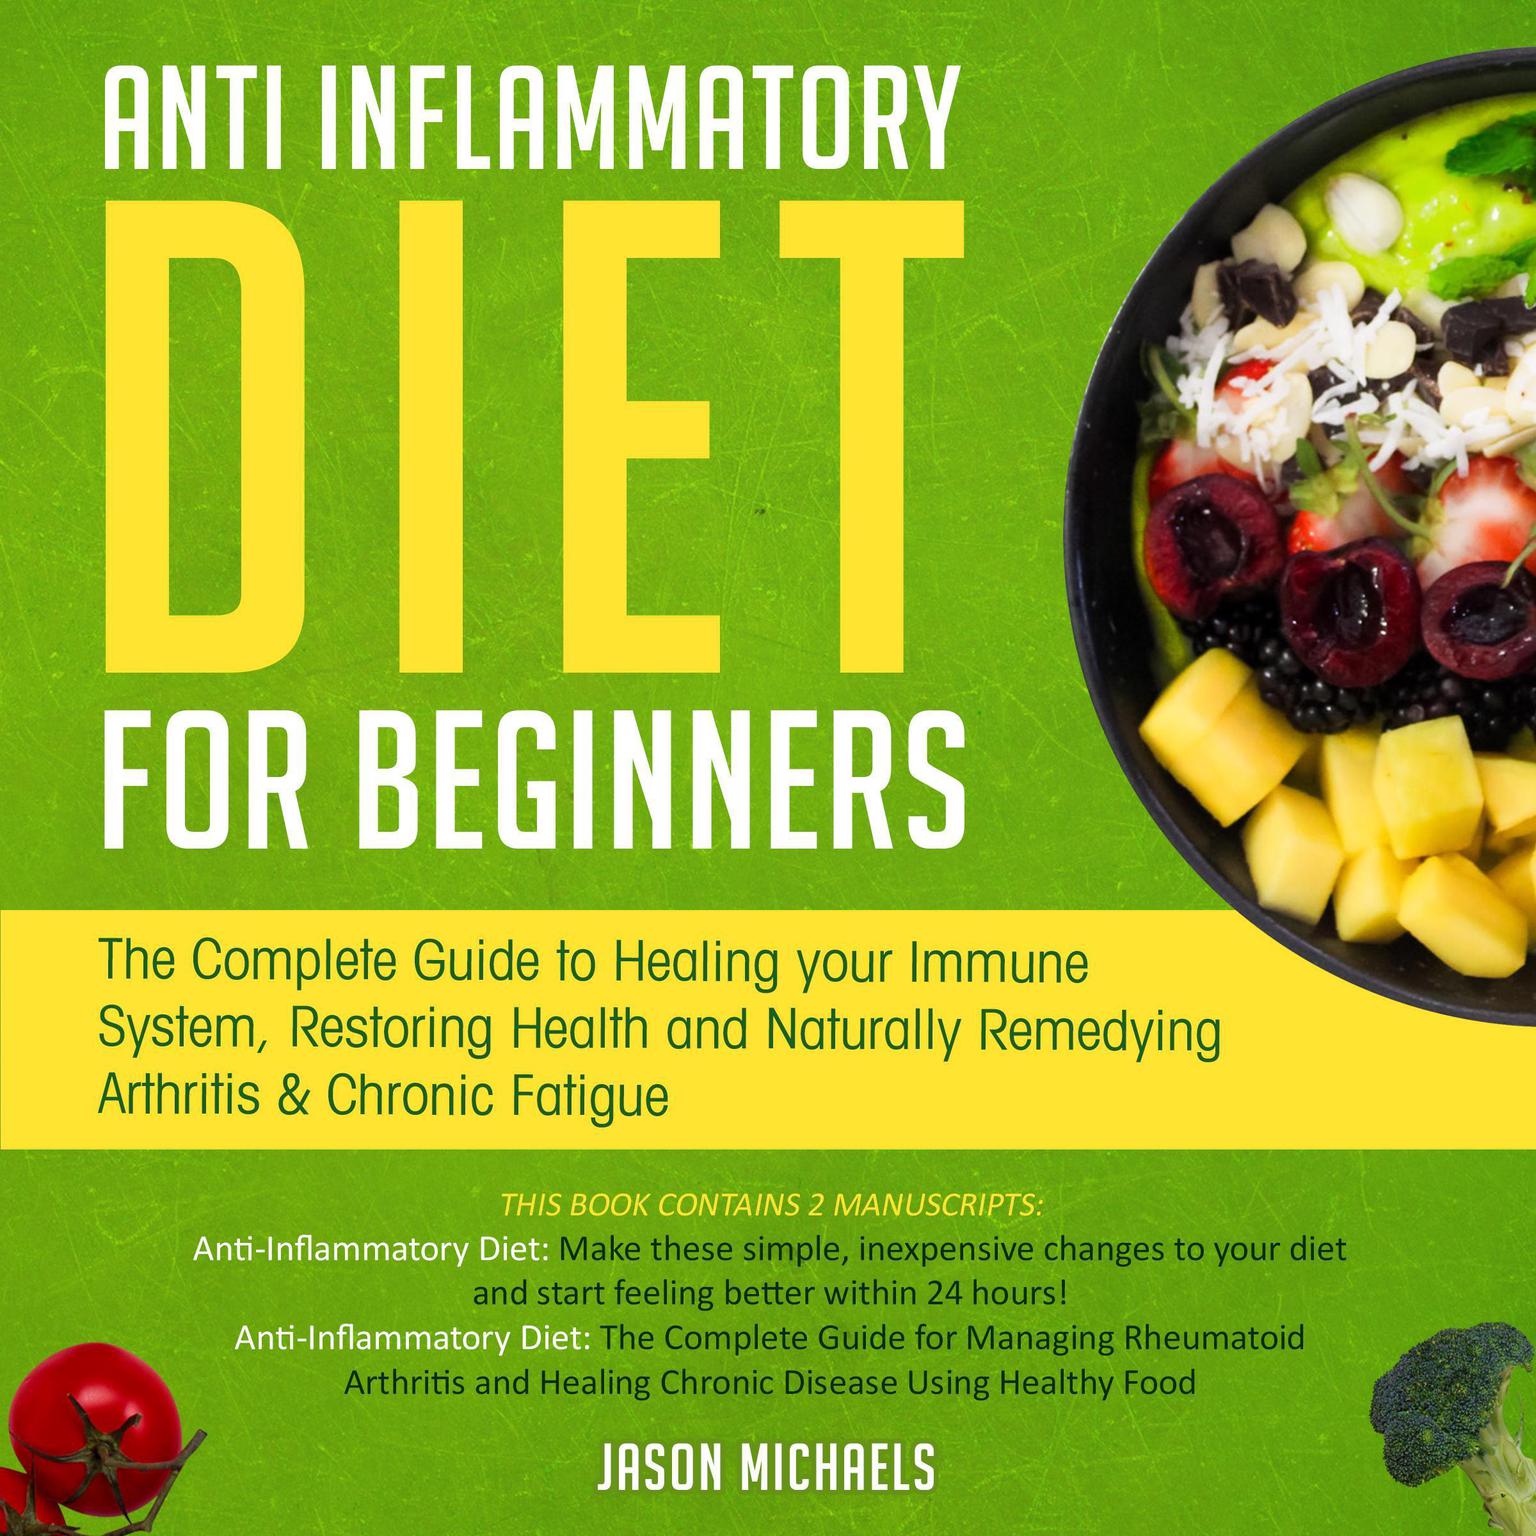 Anti-Inflammatory Diet for Beginners: The Complete Guide to Healing Your Immune System, Restoring Health and Naturally Remedying Arthritis & Chronic Fatigue Audiobook, by Jason Michaels